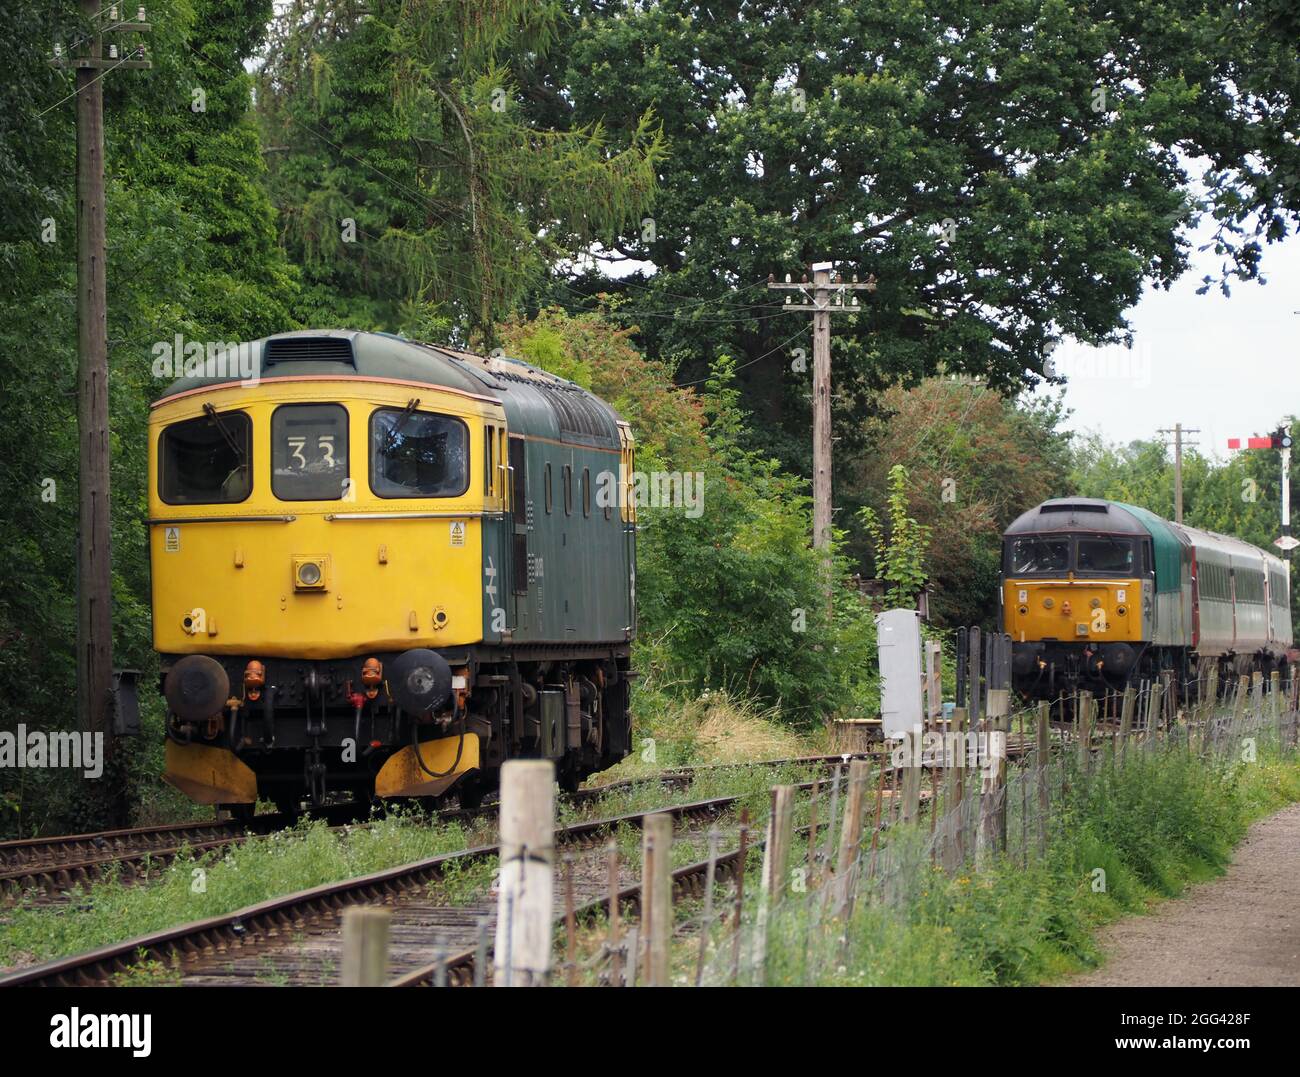 Class 33 Locomotive 33053 waits on the siding at the Northampton and Lamport Railway. Class 47 locomotive 47205 is in the background Stock Photo